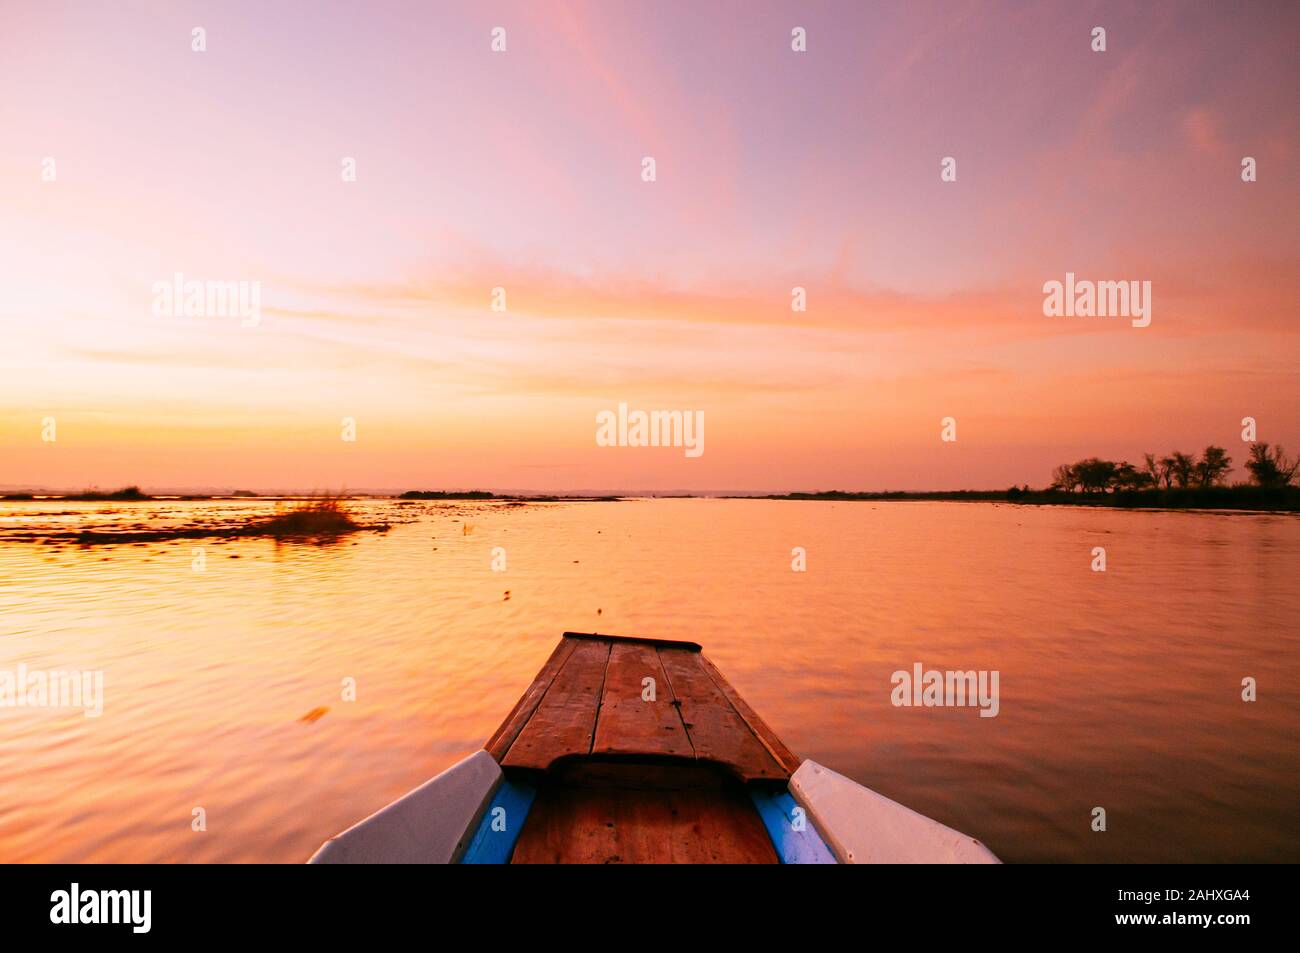 Thai long tail boat front bow in peaceful Nong Harn lake, Udonthani - Thailand. Wooden boat under vibrant beautiful sunrise sky over red lotus lake. Stock Photo